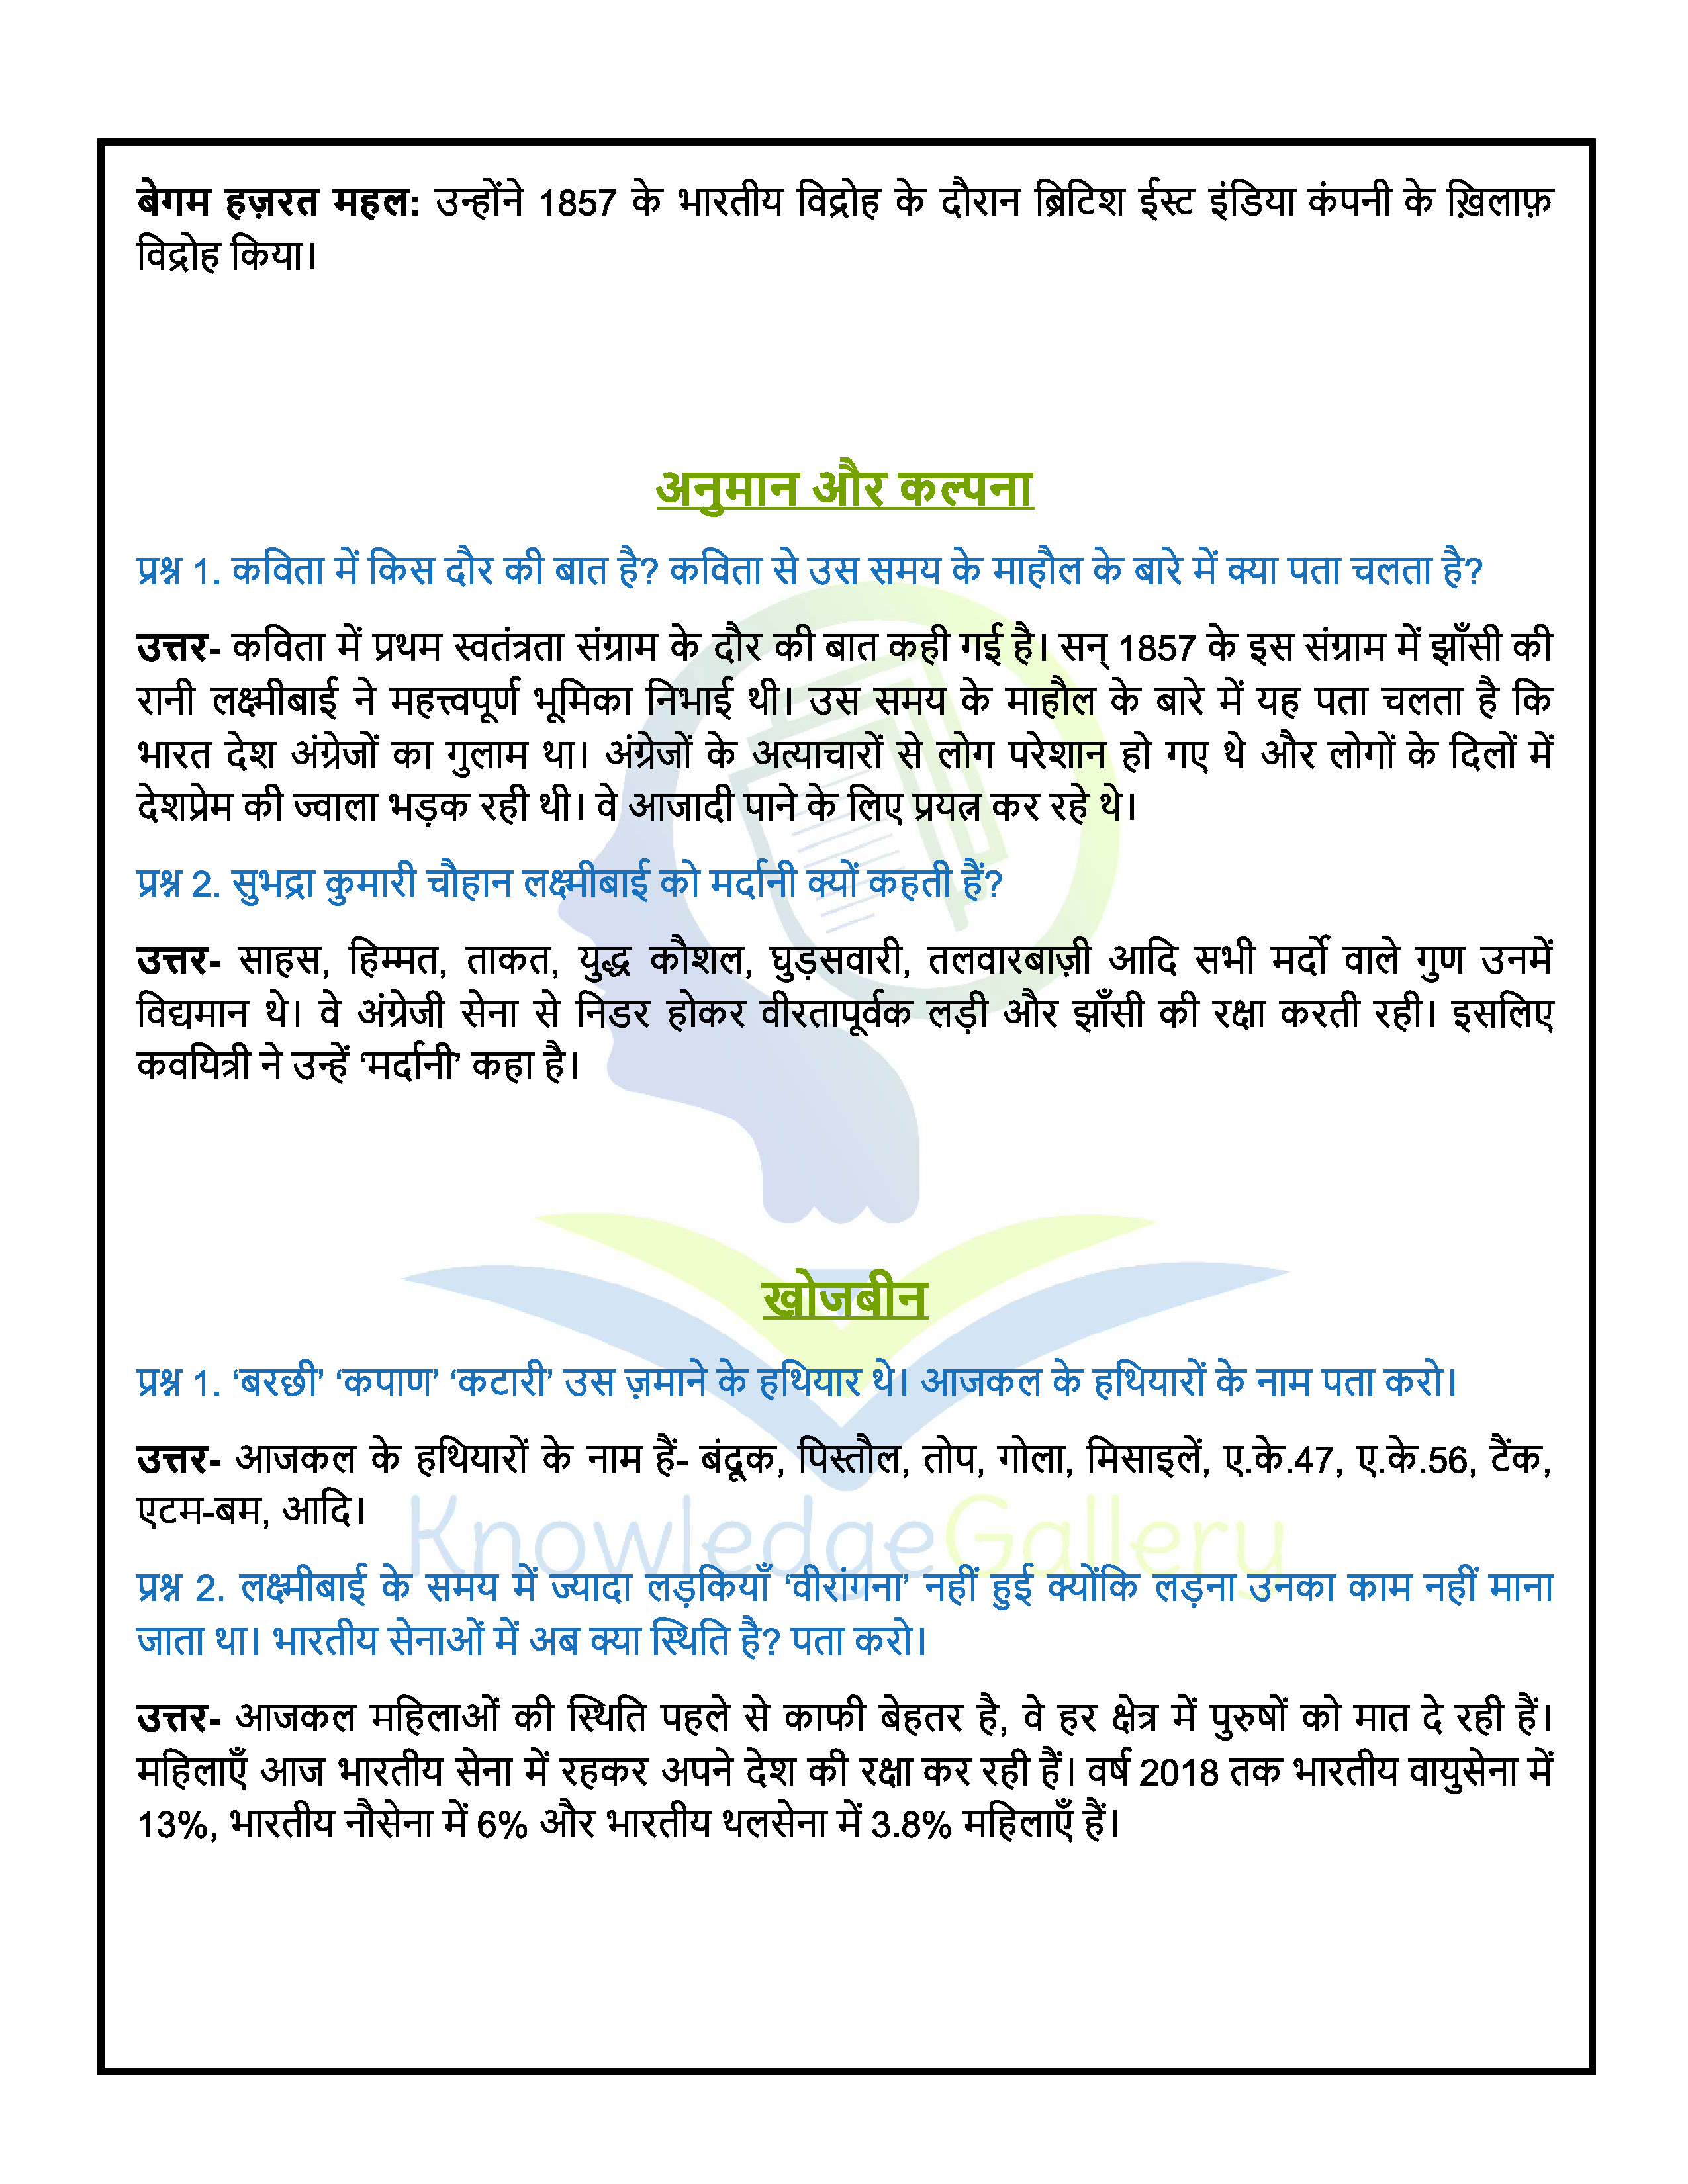 NCERT Solution For Class 6 Hindi Chapter 10 part 12